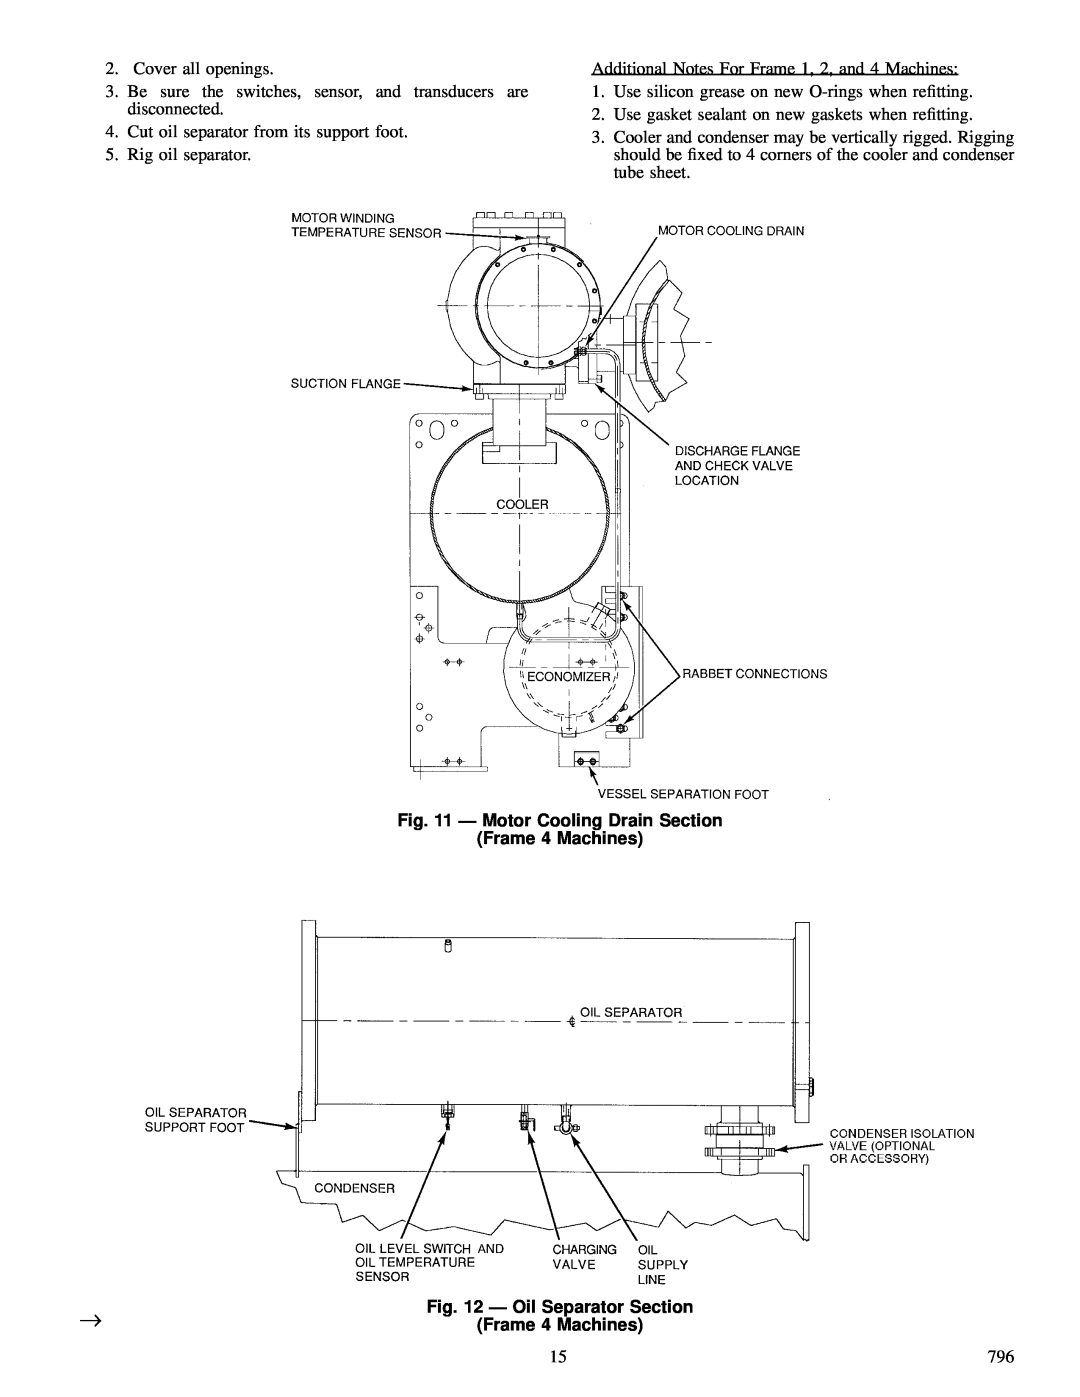 Carrier 23 XL installation instructions Ð Motor Cooling Drain Section, Frame 4 Machines, Ð Oil Separator Section 